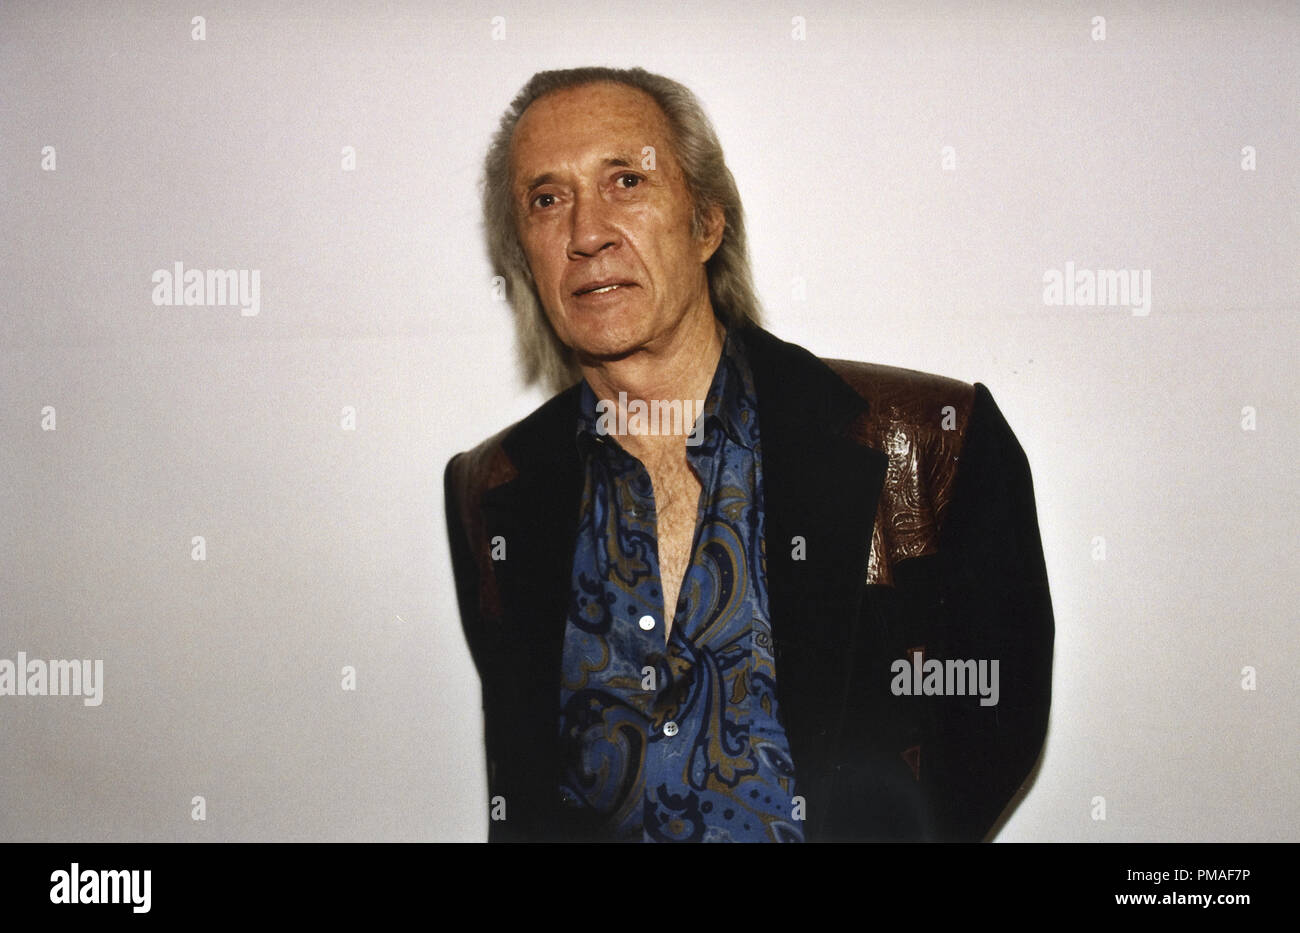 Portrait of David Carradine, circa 2004 © JRC /The Hollywood Archive - All Rights Reserved  File Reference # 32633 335JRC Stock Photo